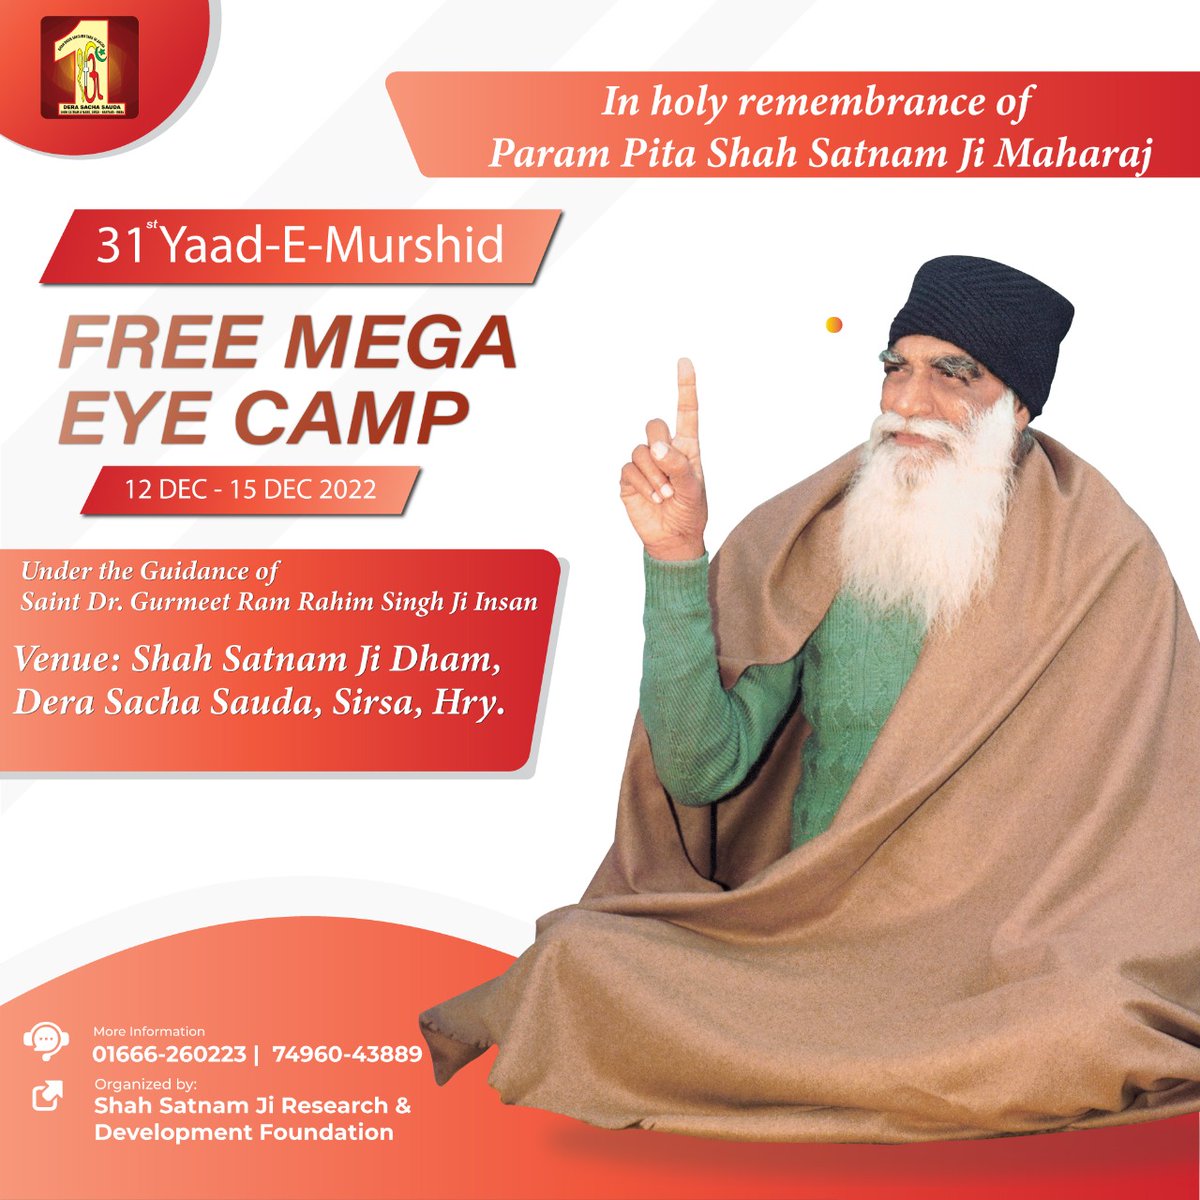 The arrival of December month is a boon for visually challenged people! Dera Sacha Sauda is organizing the 31st Free Mega Yaad-E-Murshid eye camp from 12th to 15th December. Beneficiaries will be provided with free eye screening, surgeries and post operative care. #FreeEyeCamp